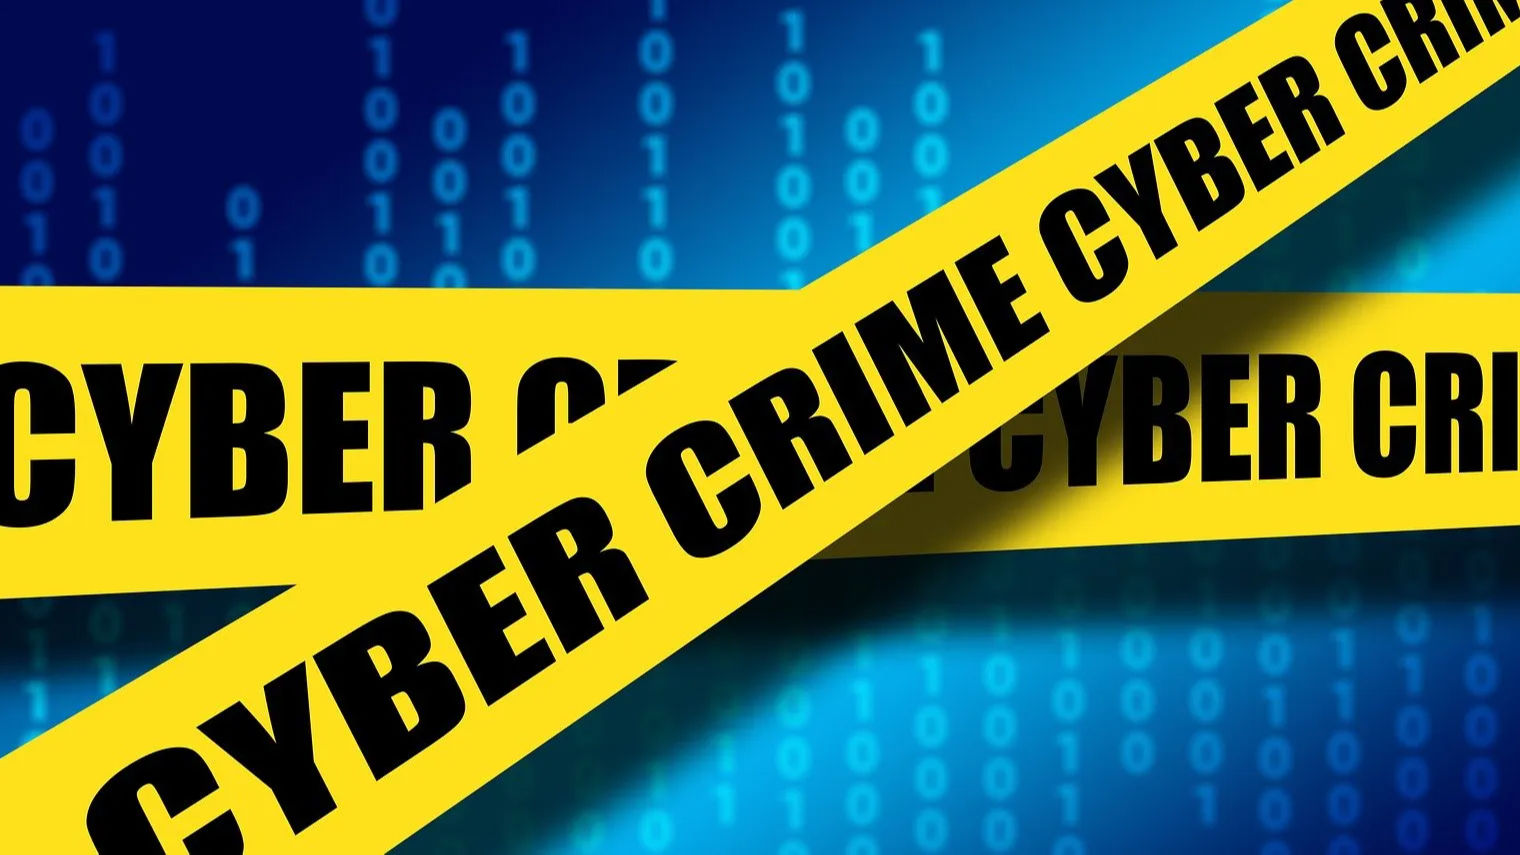 Think before you click: SBI warns customers about cyber crimes